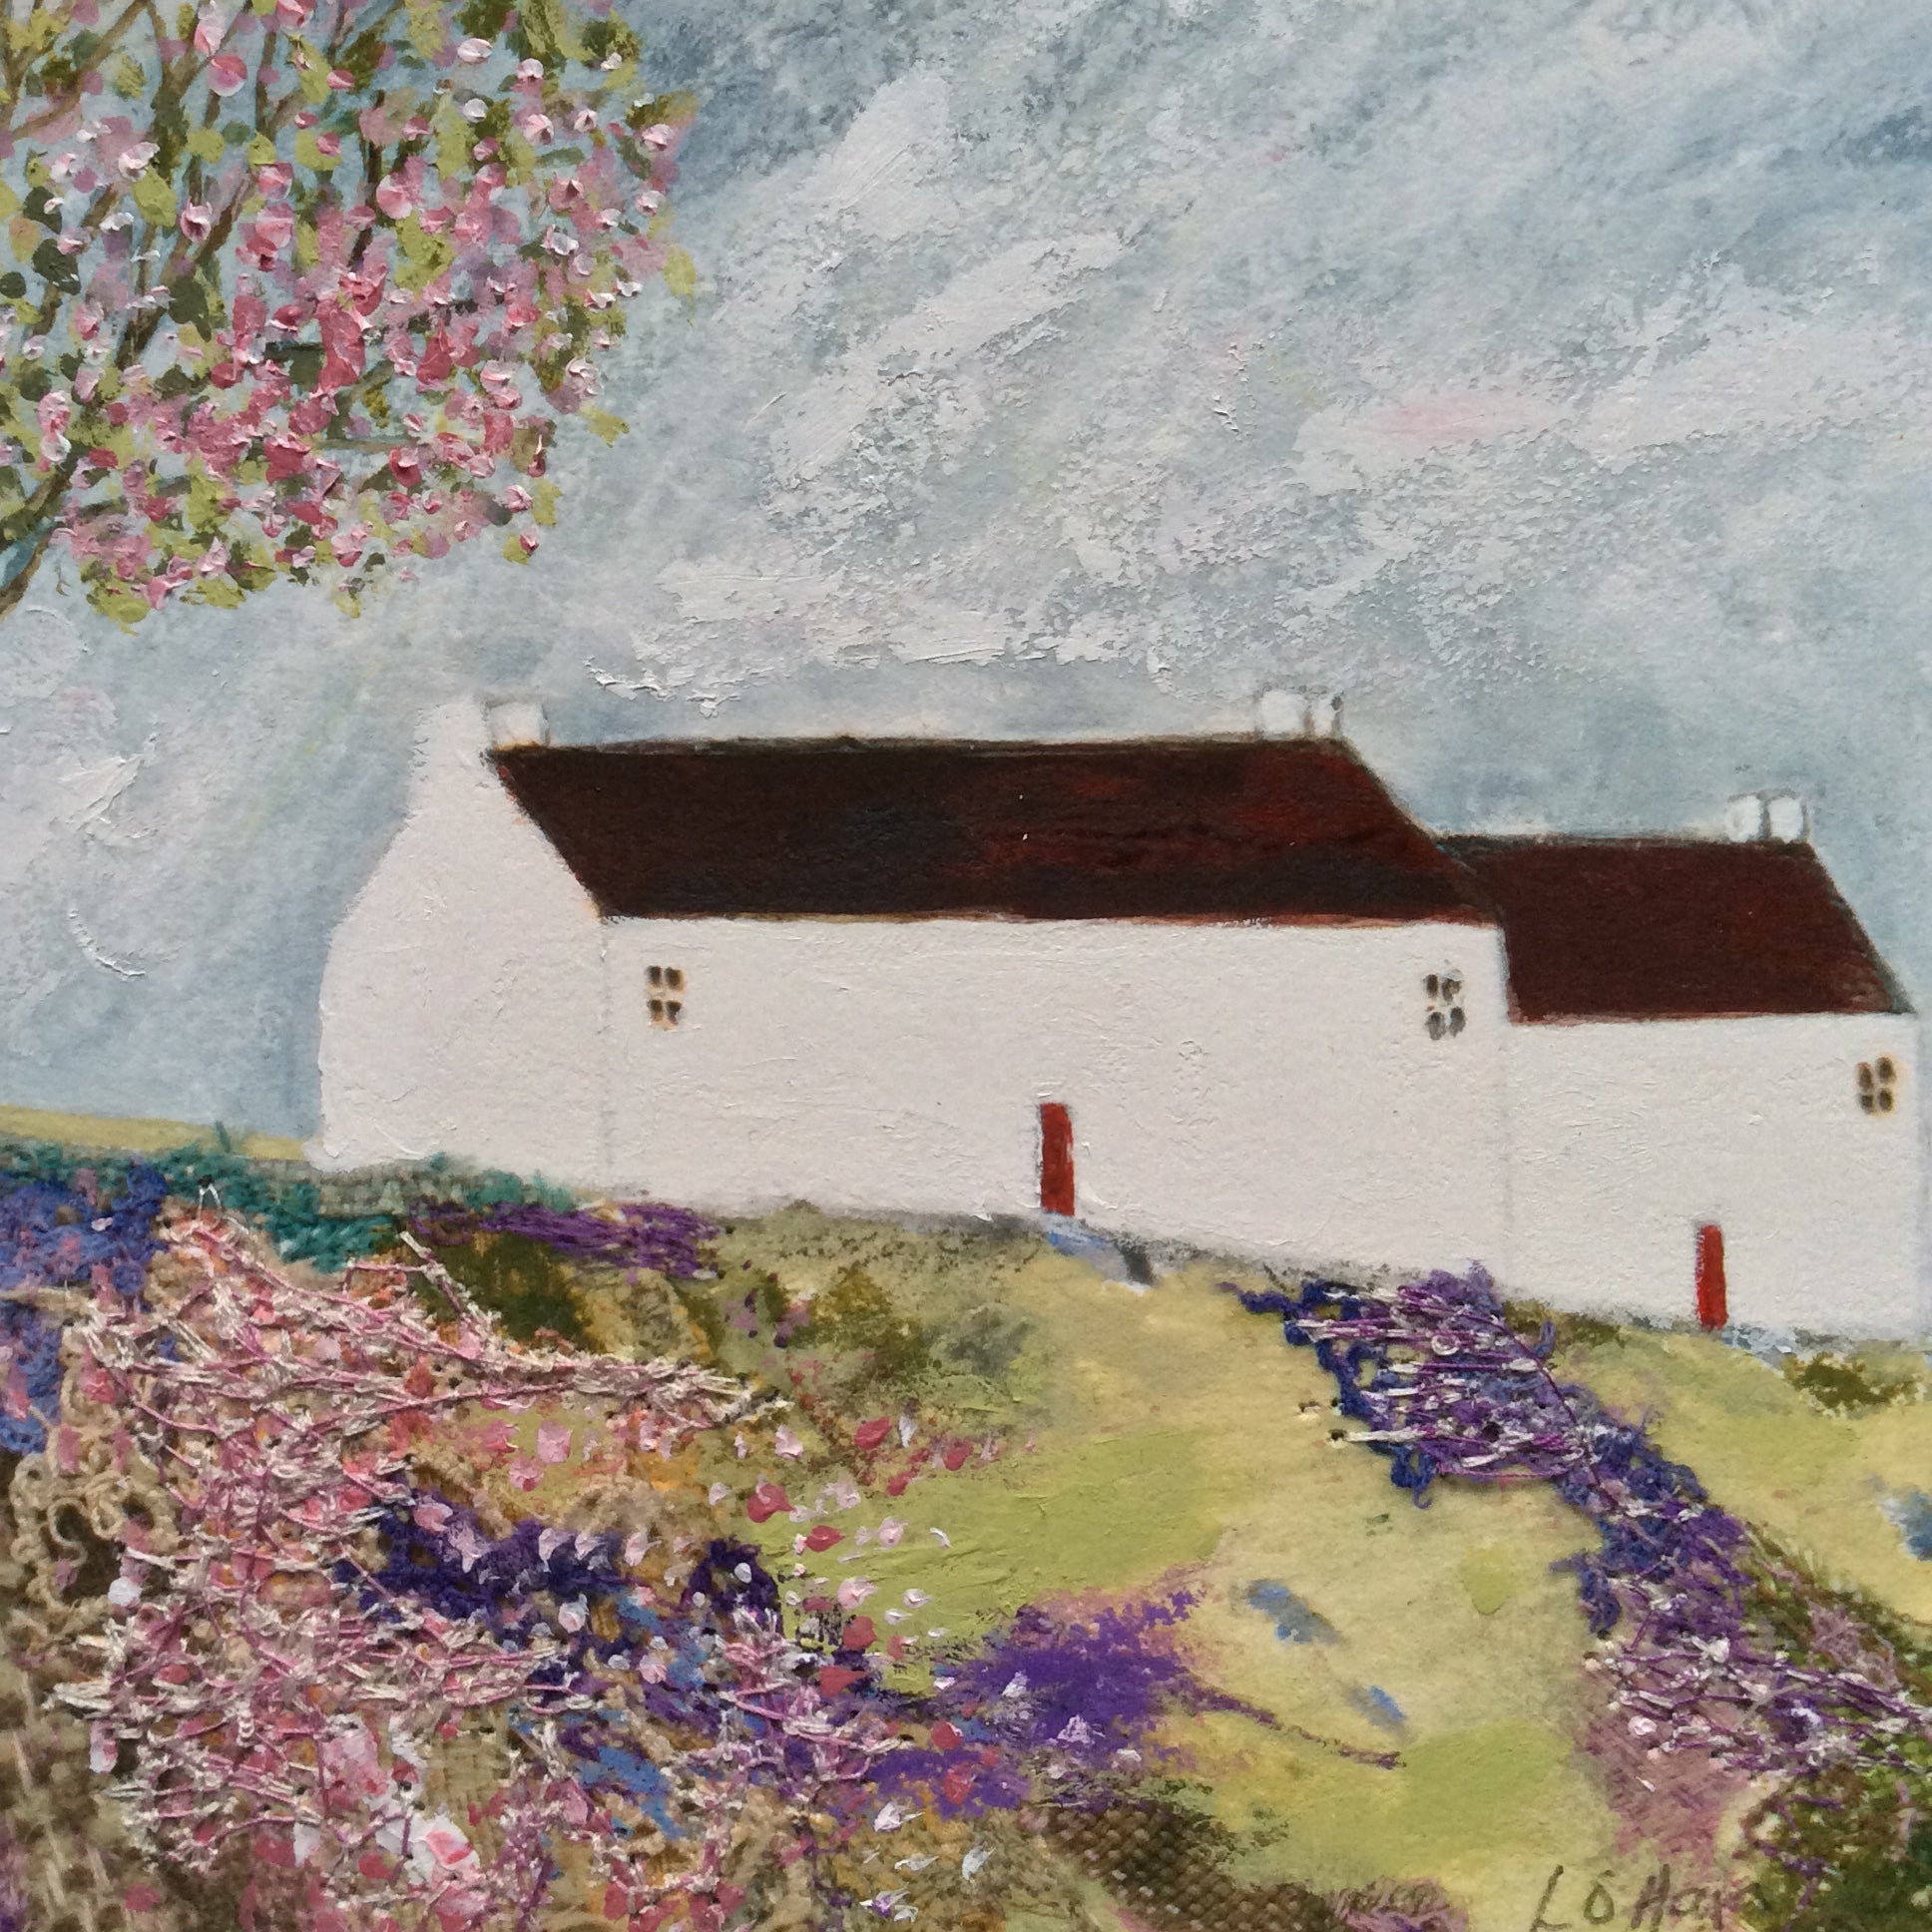 Mixed Media Art print work by Louise O'Hara "The Blossom Tree at White Cottage"